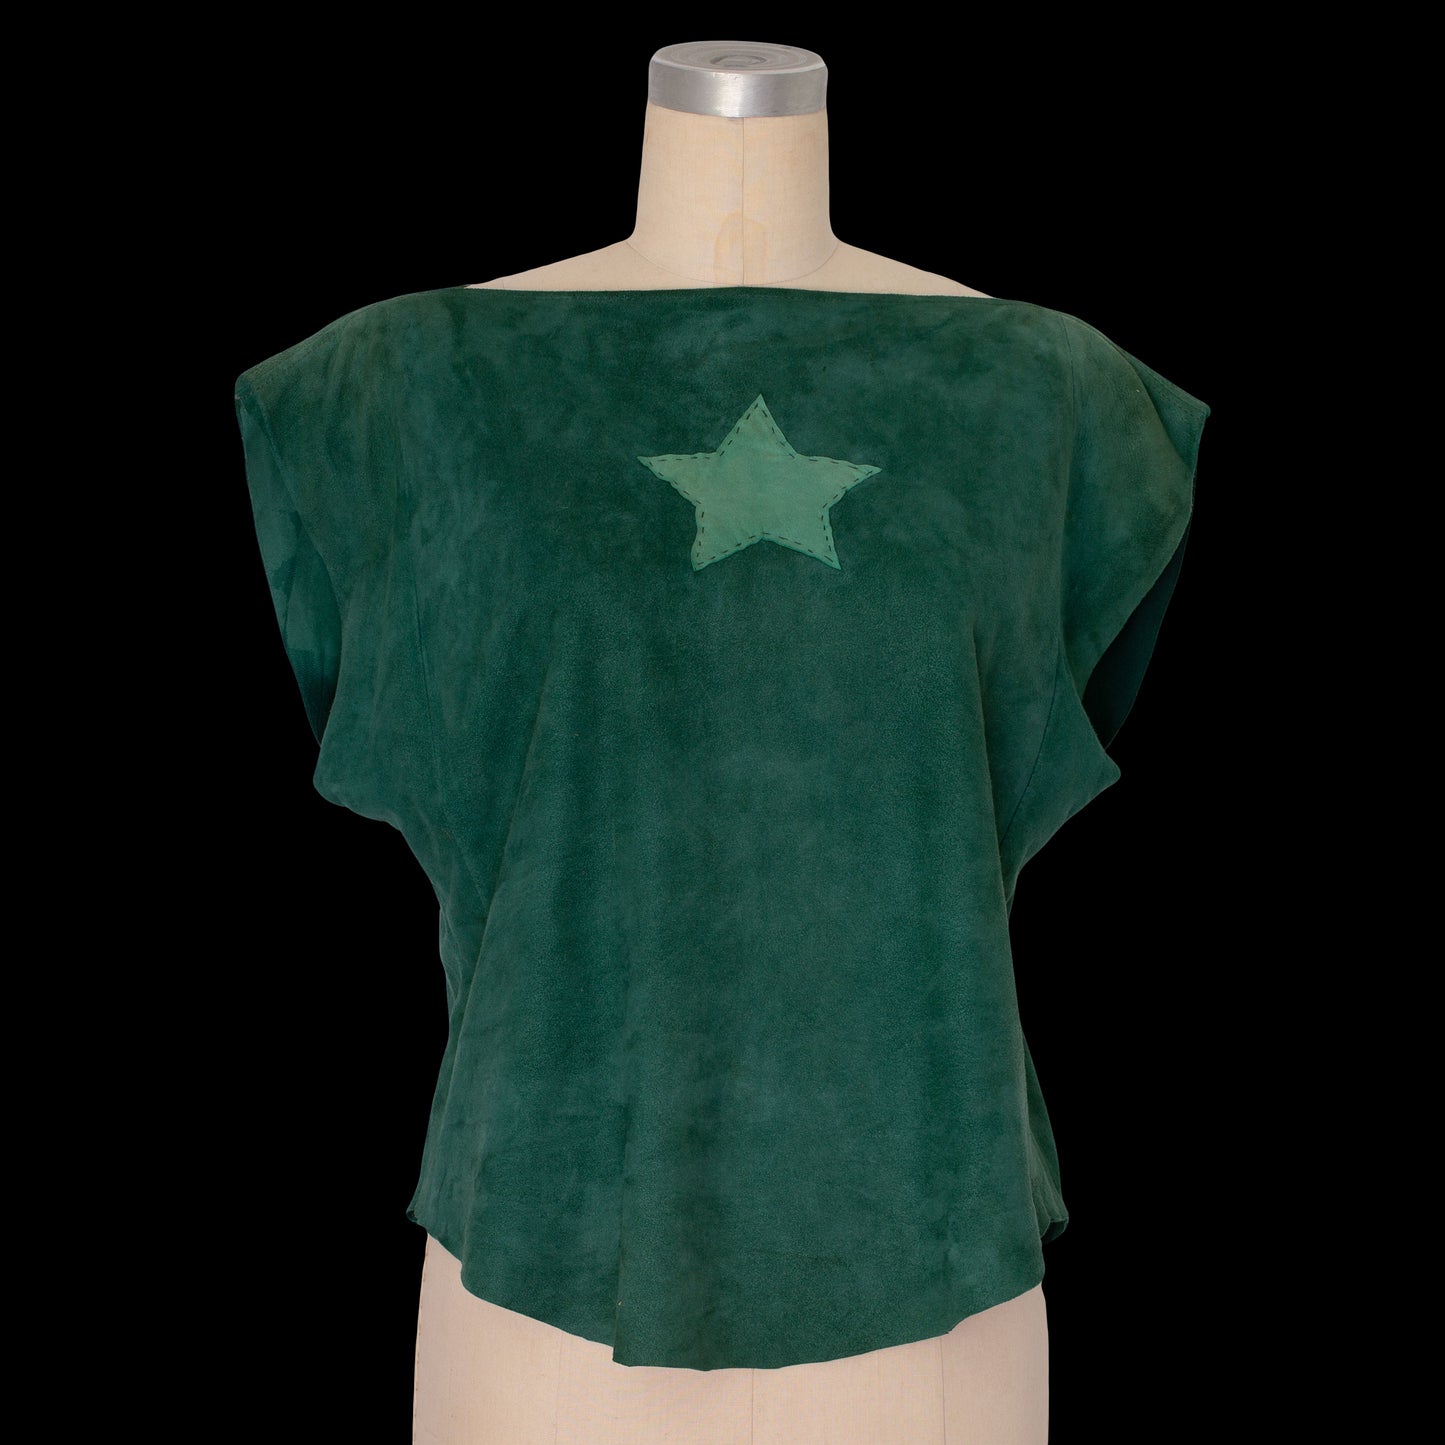 Reworked Green Suede Star Appliqué Blouse